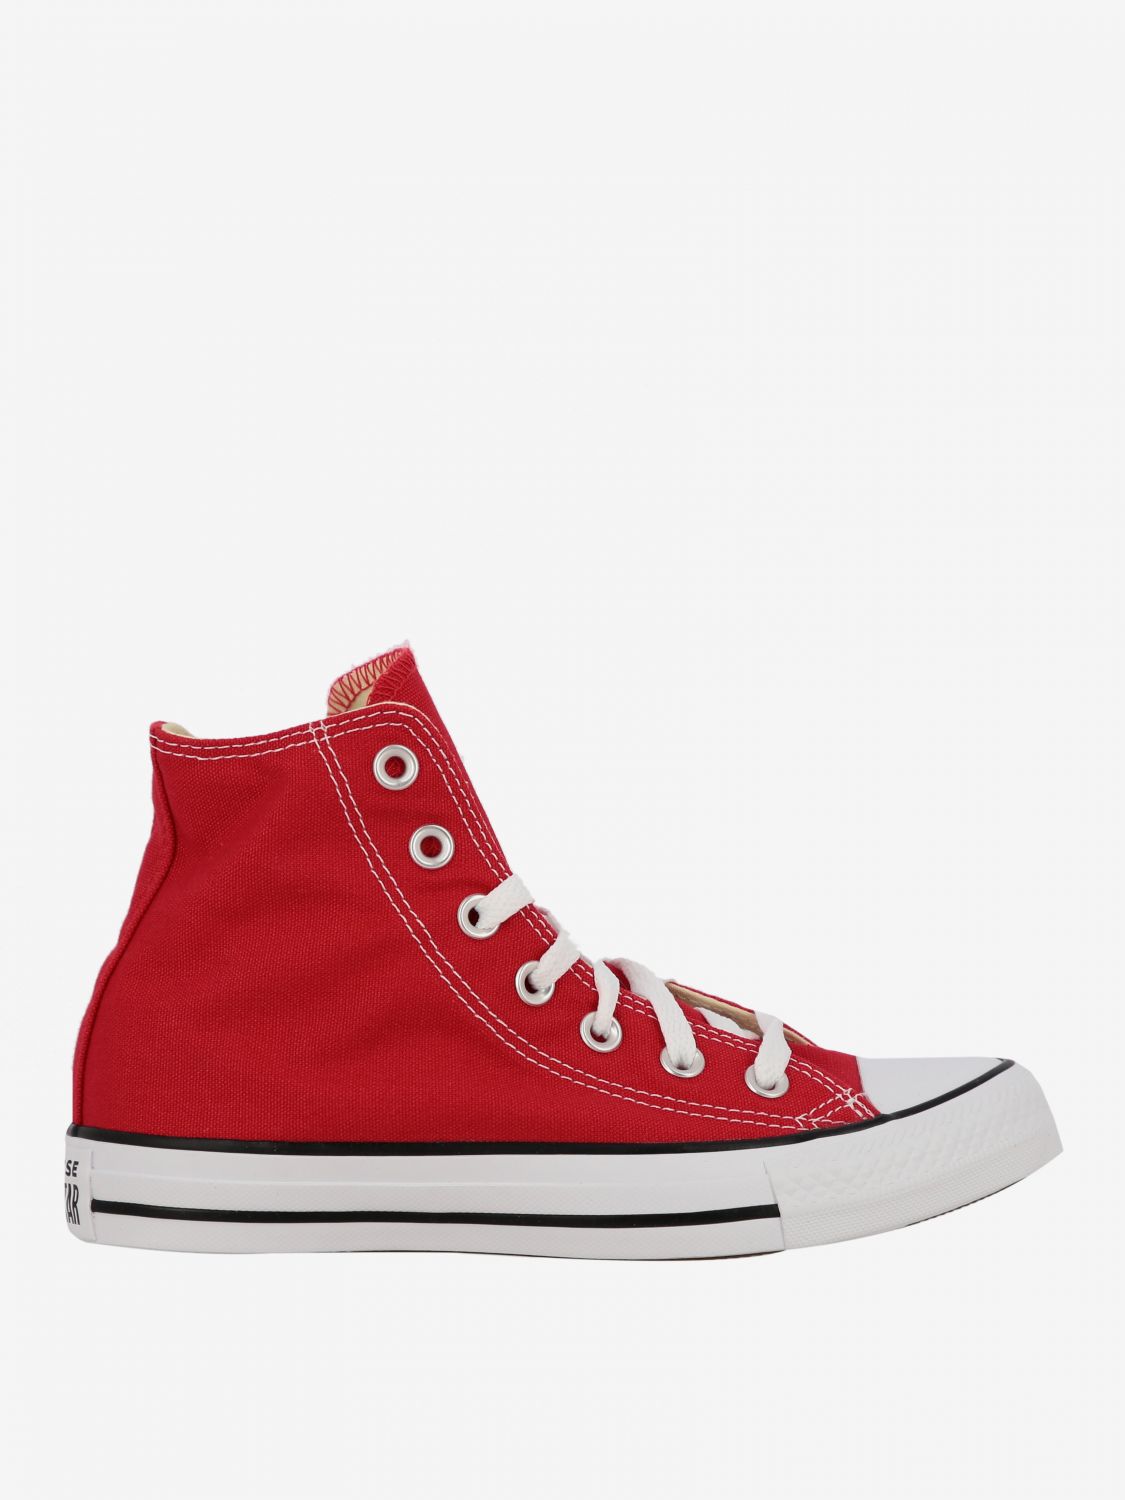 chaussure converse rouge